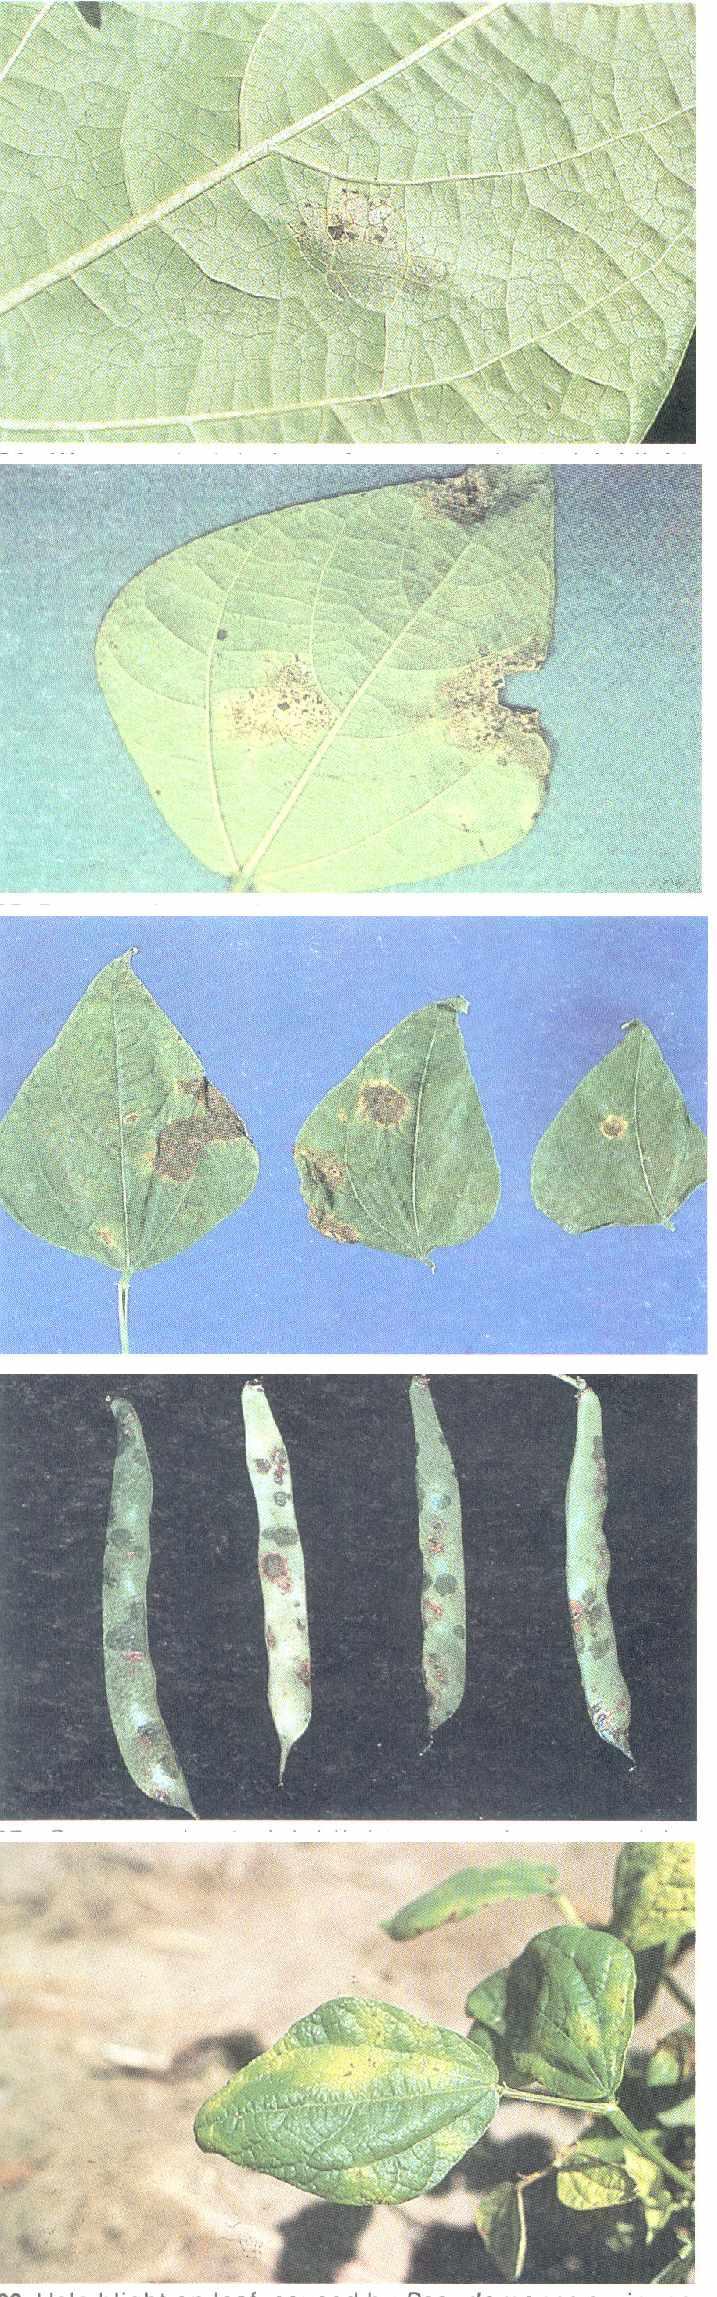 96 Water-soaked lesion of common bacterial blight, caused by Xanthomonas campestris pv. Phaseoli. 97 Common bacterial blight on lower leaf surface, caused by Xanphomonas campestris pv.